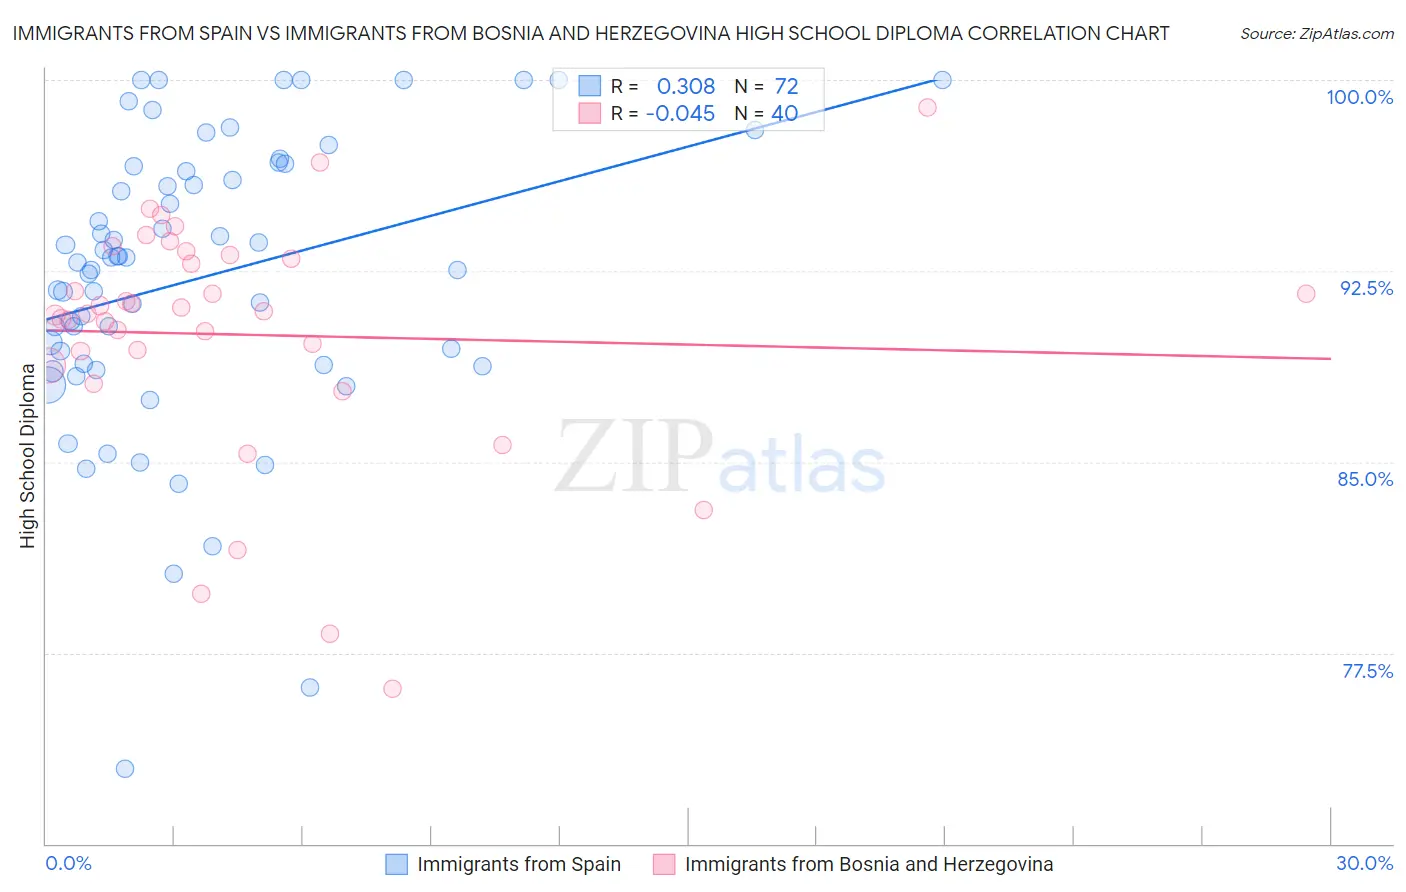 Immigrants from Spain vs Immigrants from Bosnia and Herzegovina High School Diploma